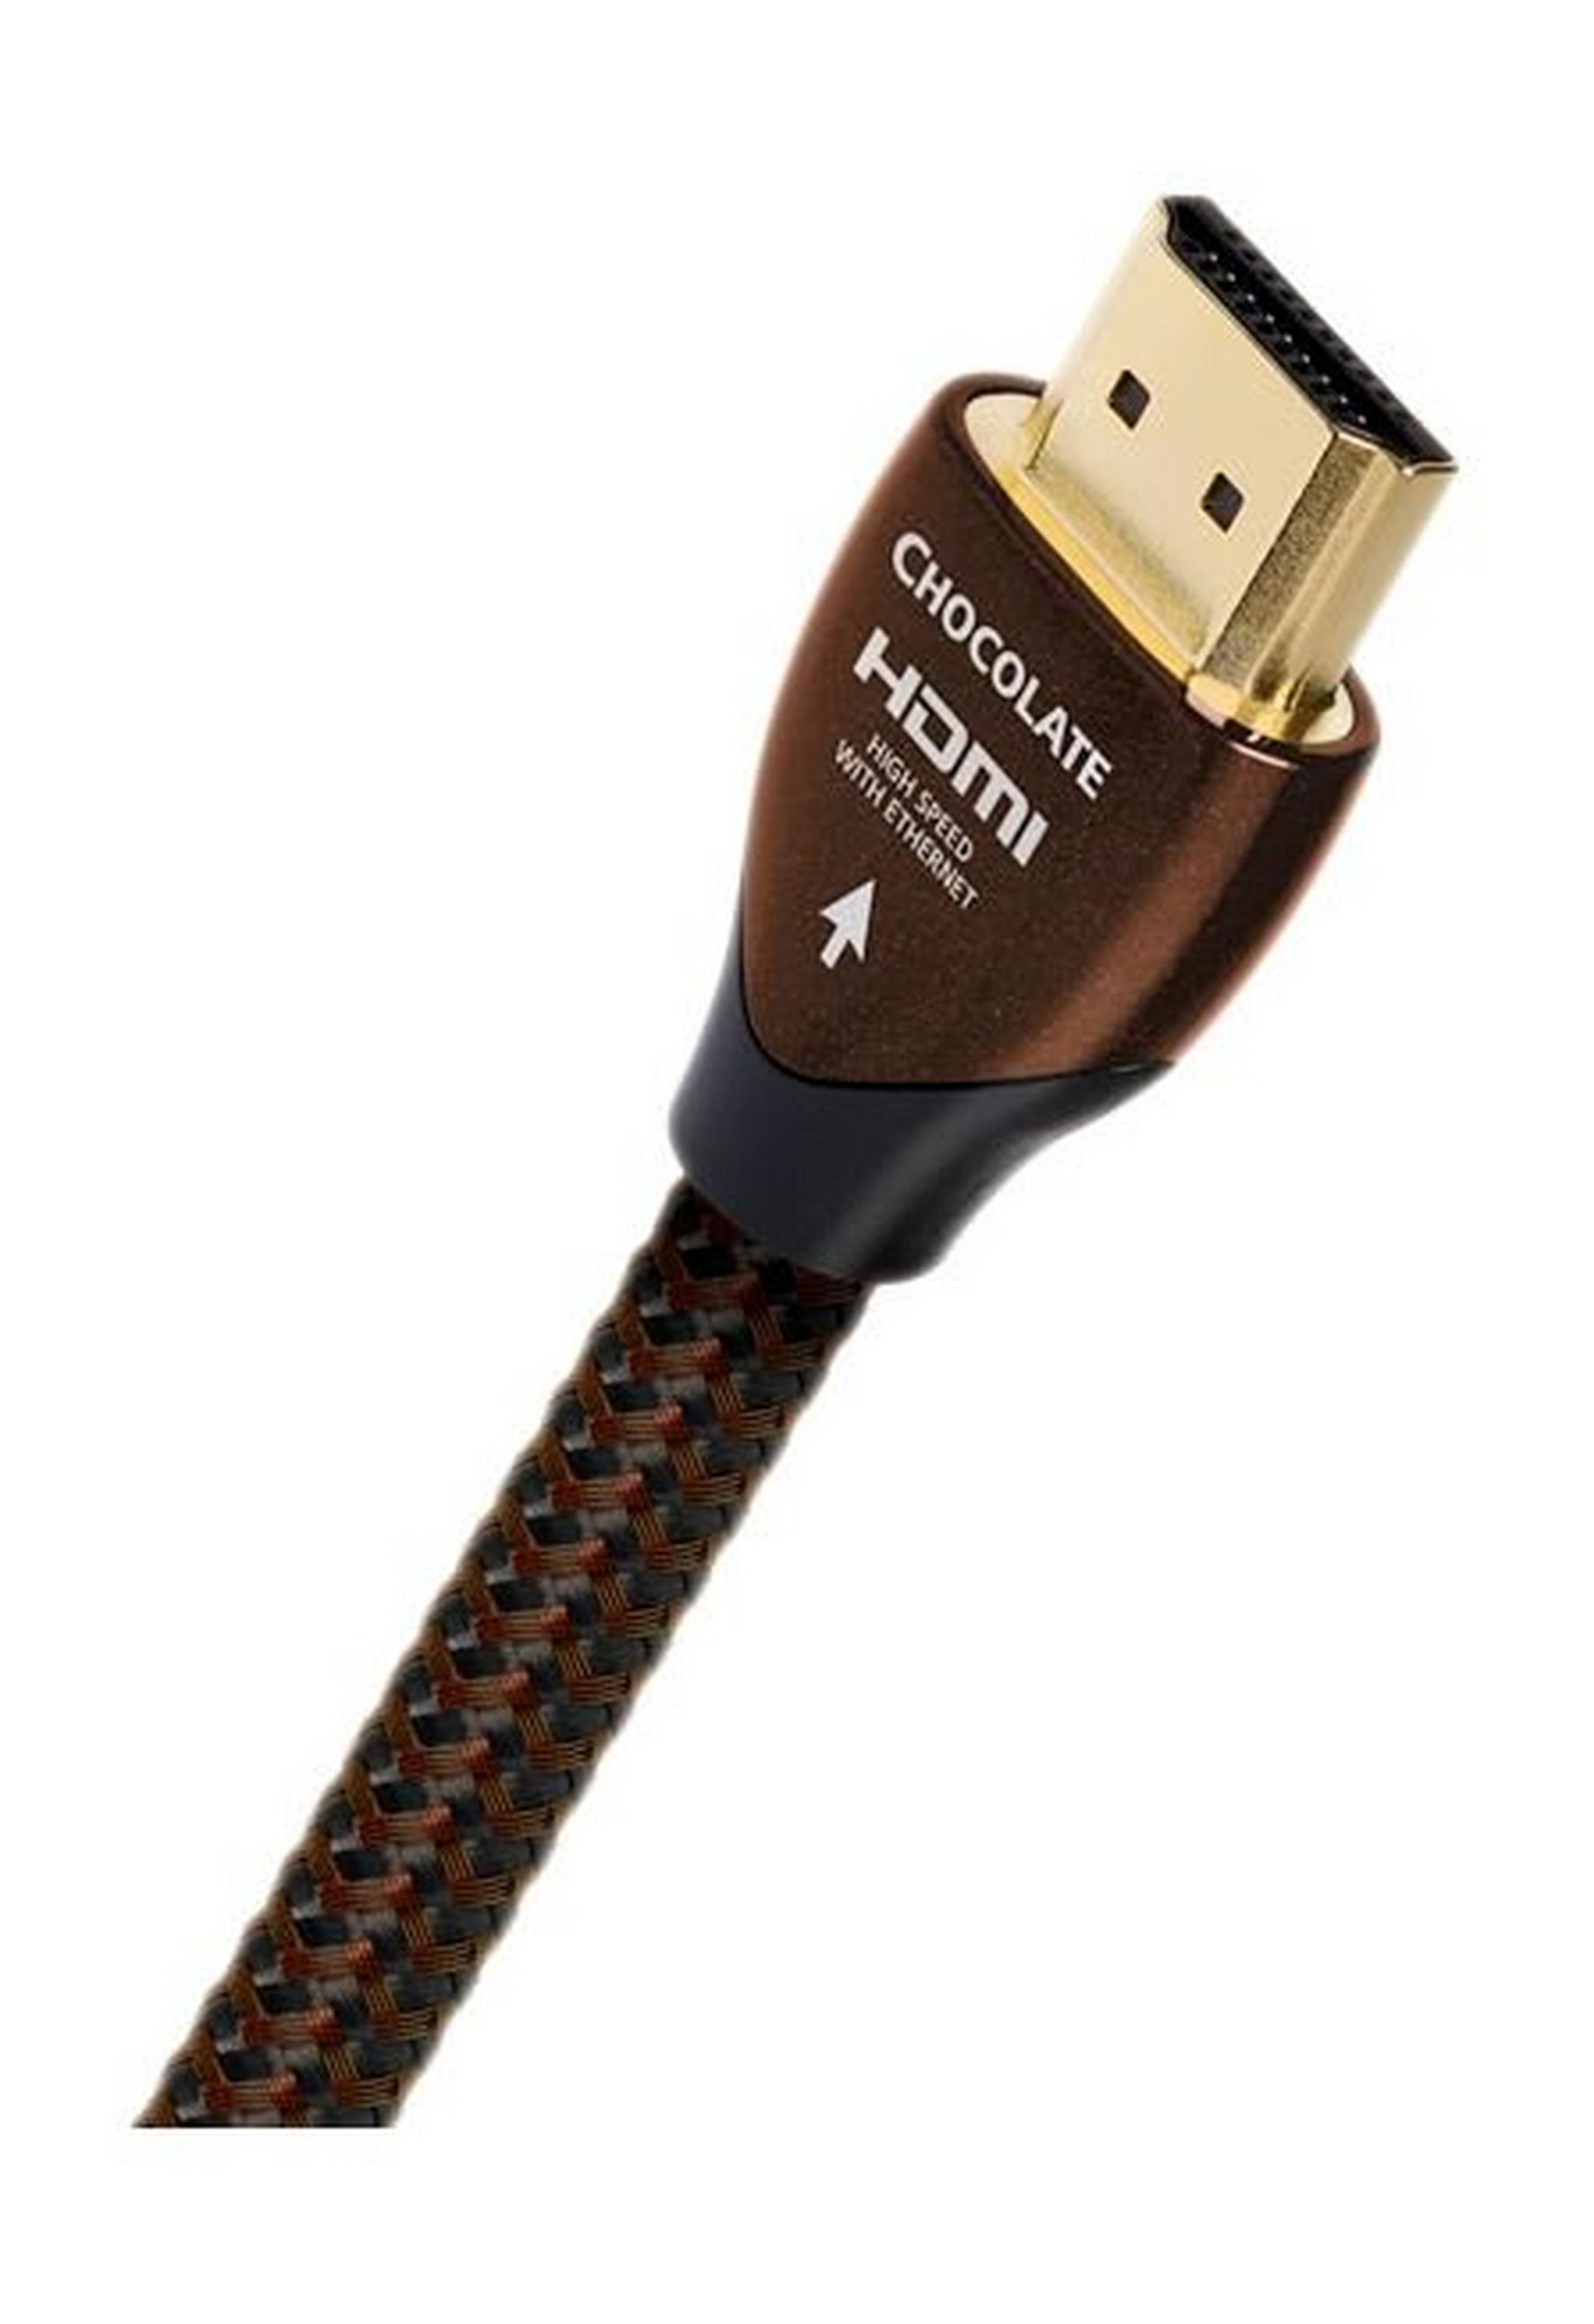 Audioquest Chocolate HDMI Cable 2m - Brown